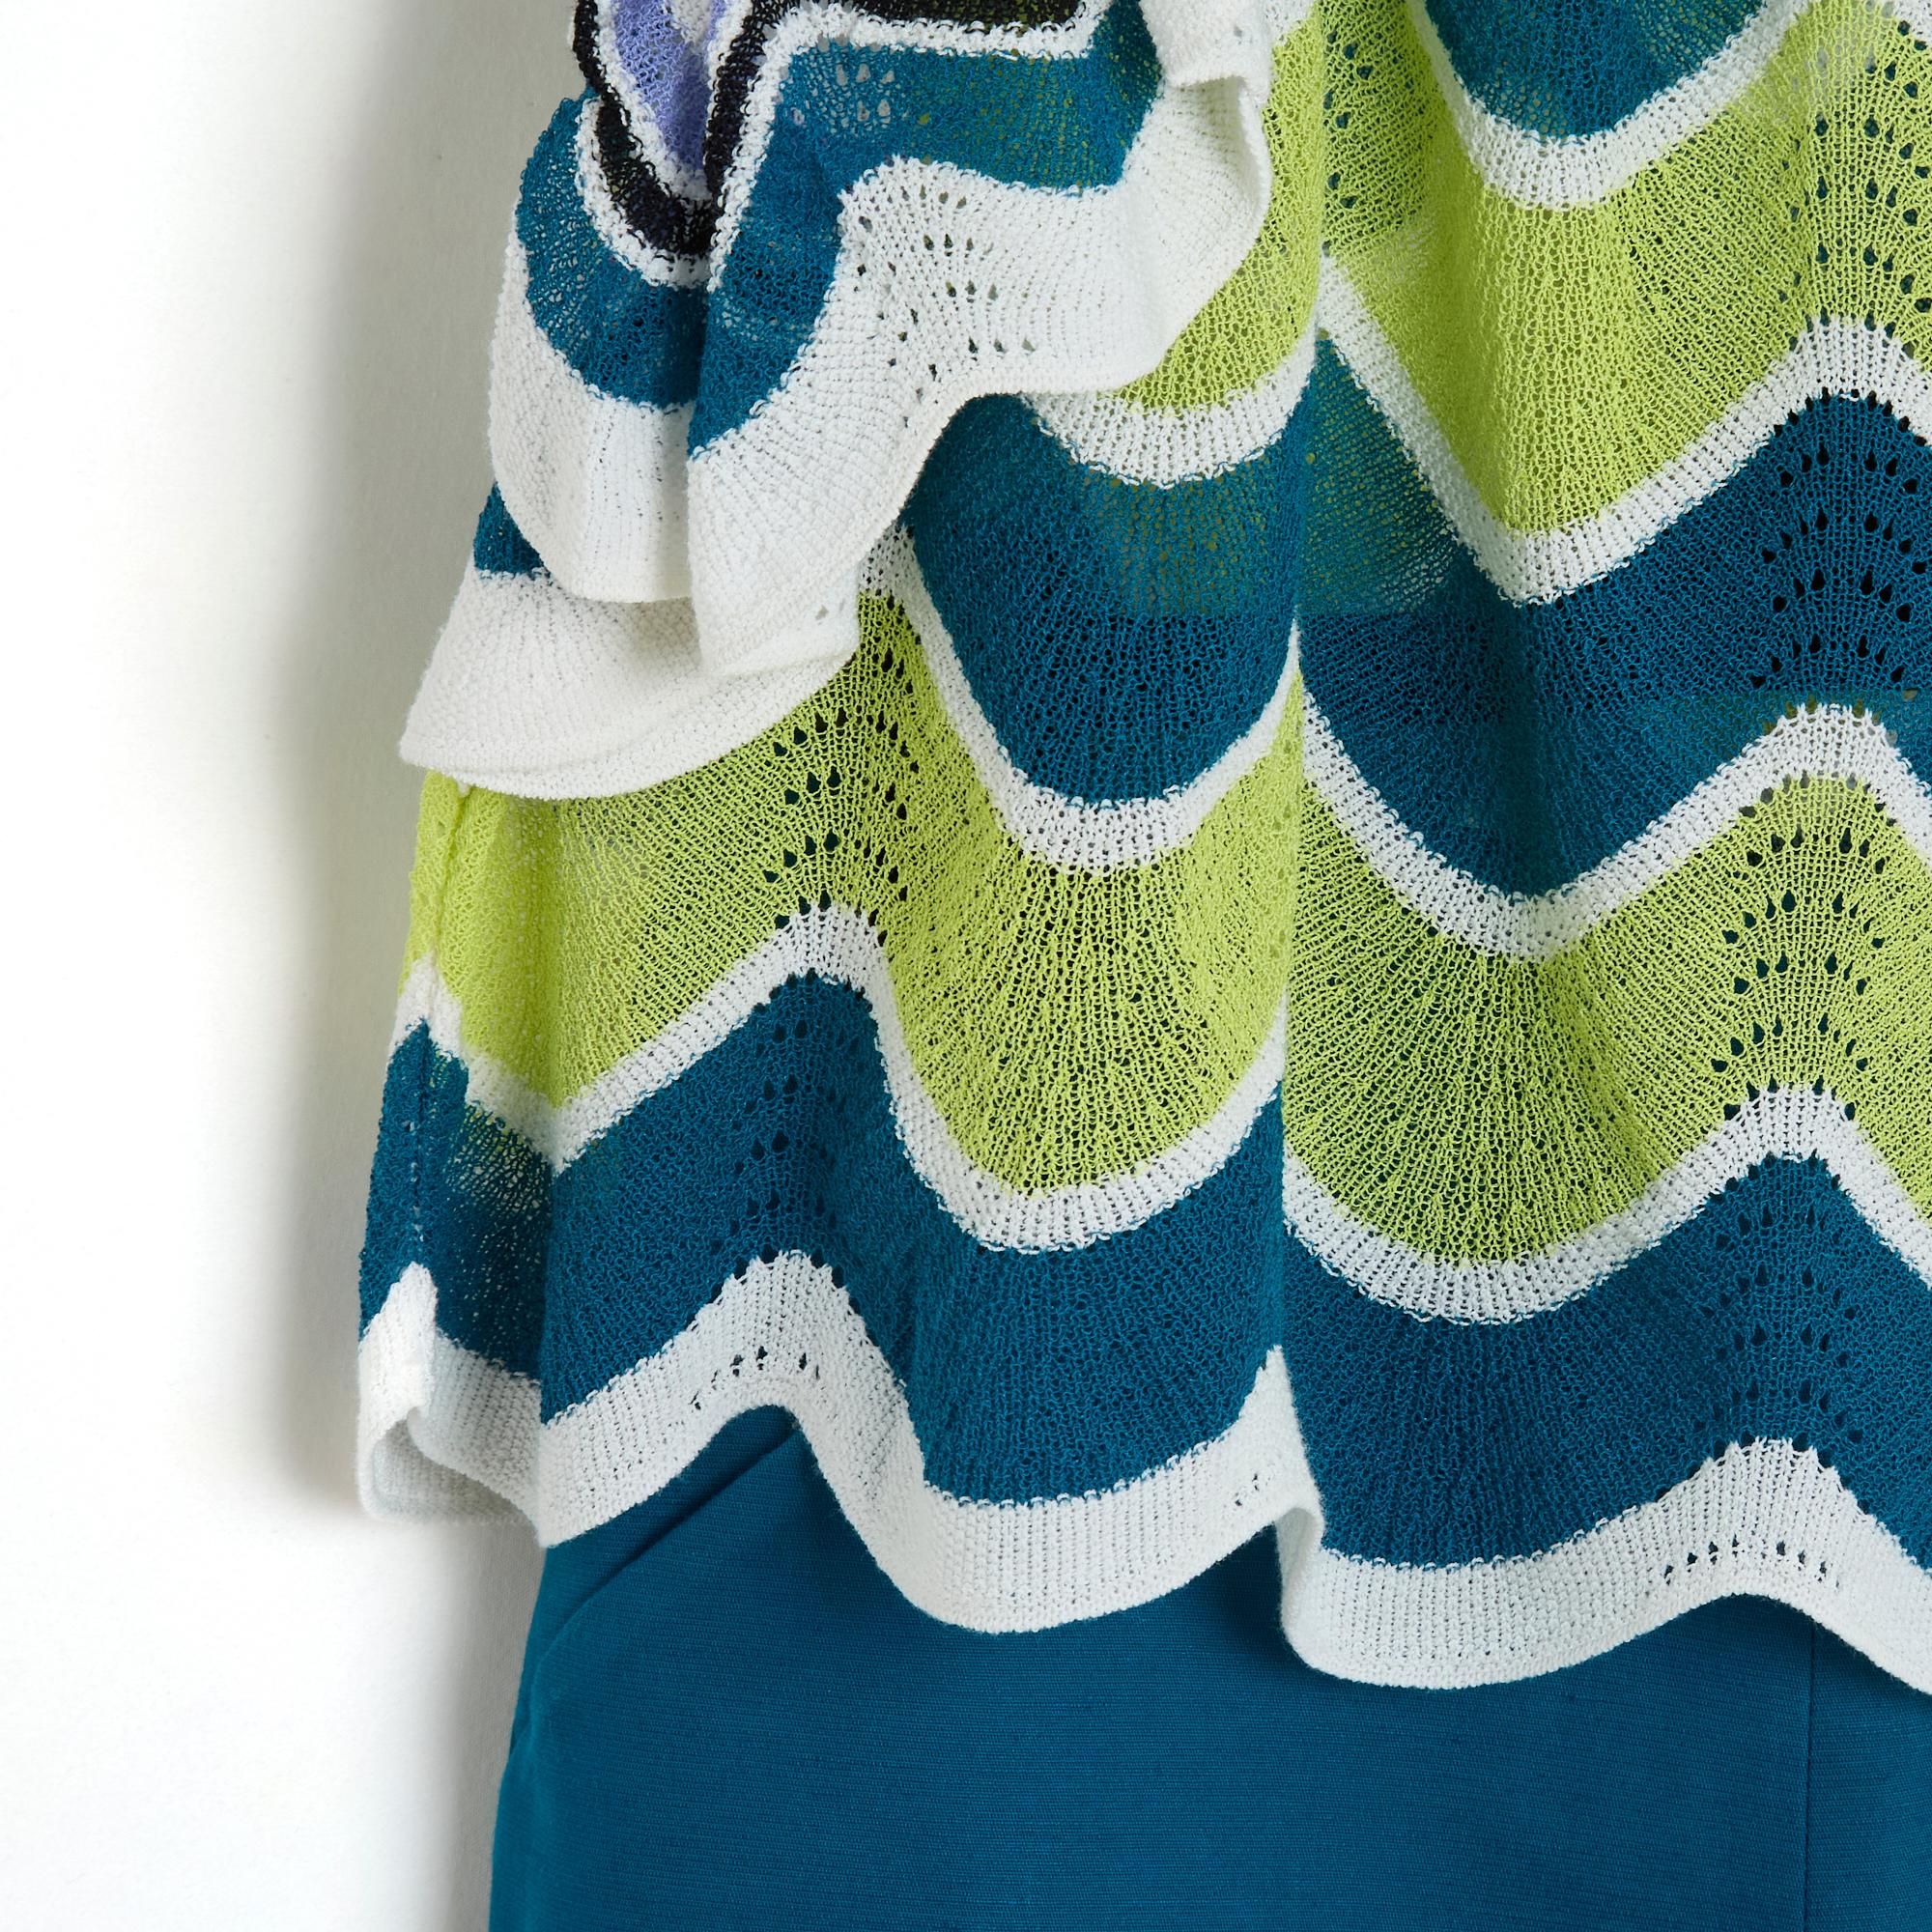 Missoni M set composed of a slightly shimmering white, duck blue, fresh green and purple gray cotton knit top, wide boat neckline, 2 ruffles, with rounded patterns and matching short shorts in blue cotton canvas, size high, 2 slanted slit pockets,